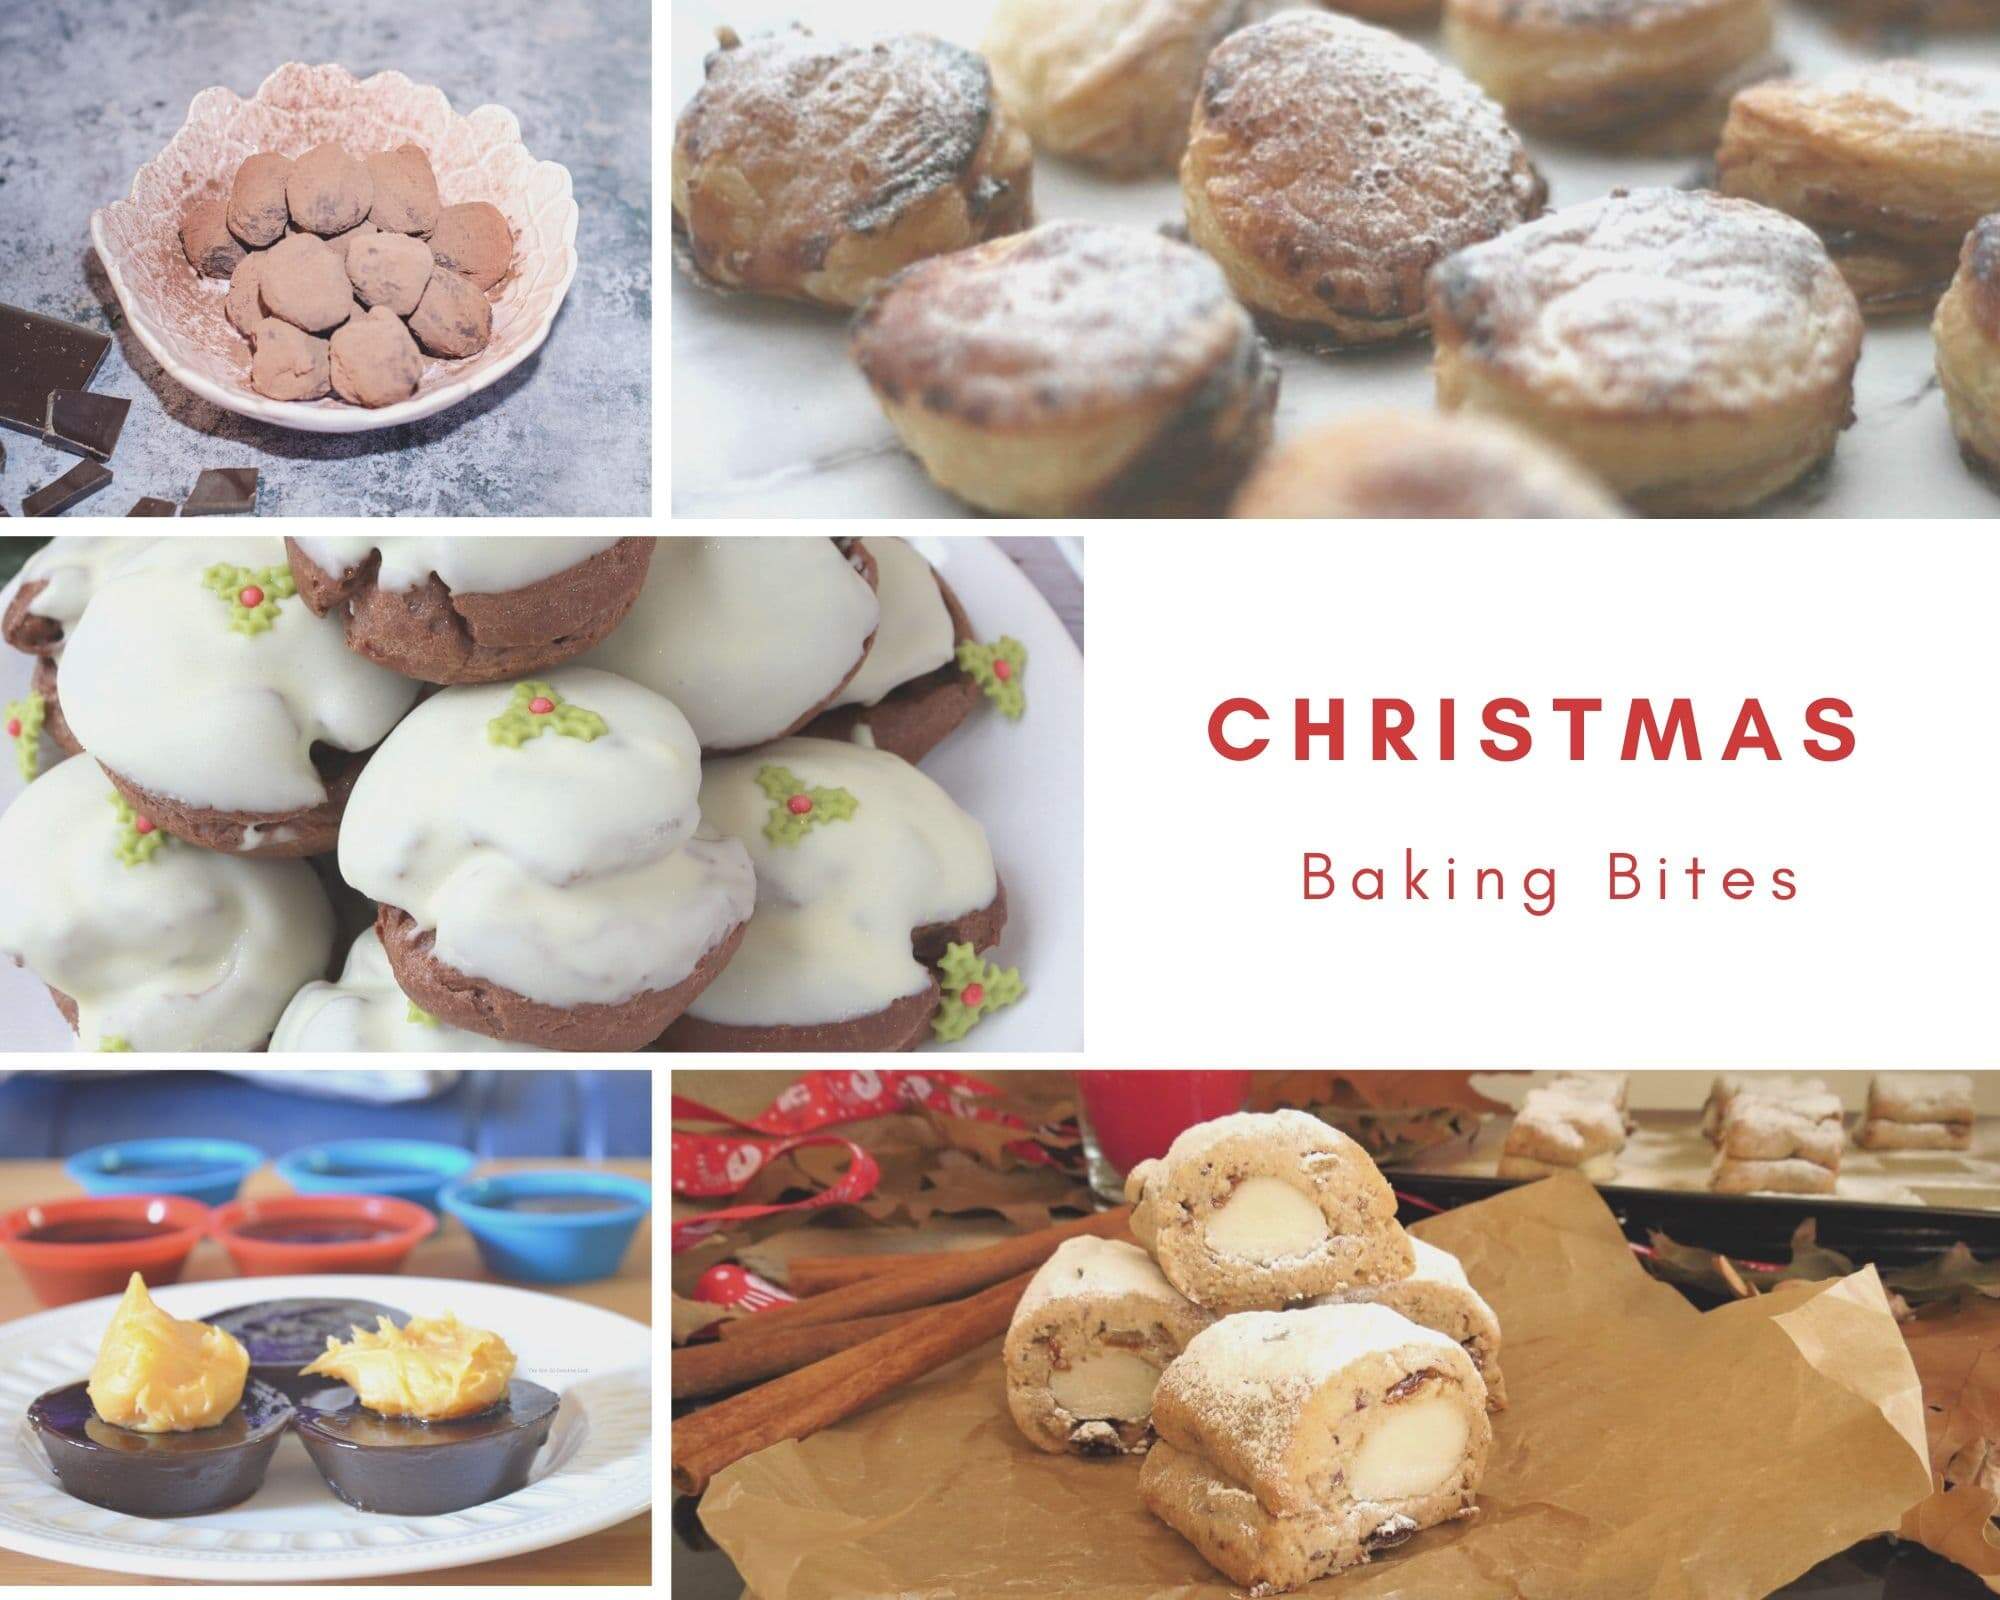 A collage of images for Christmas baking including stollen, mince pies, chocolate truffles and profiteroles.